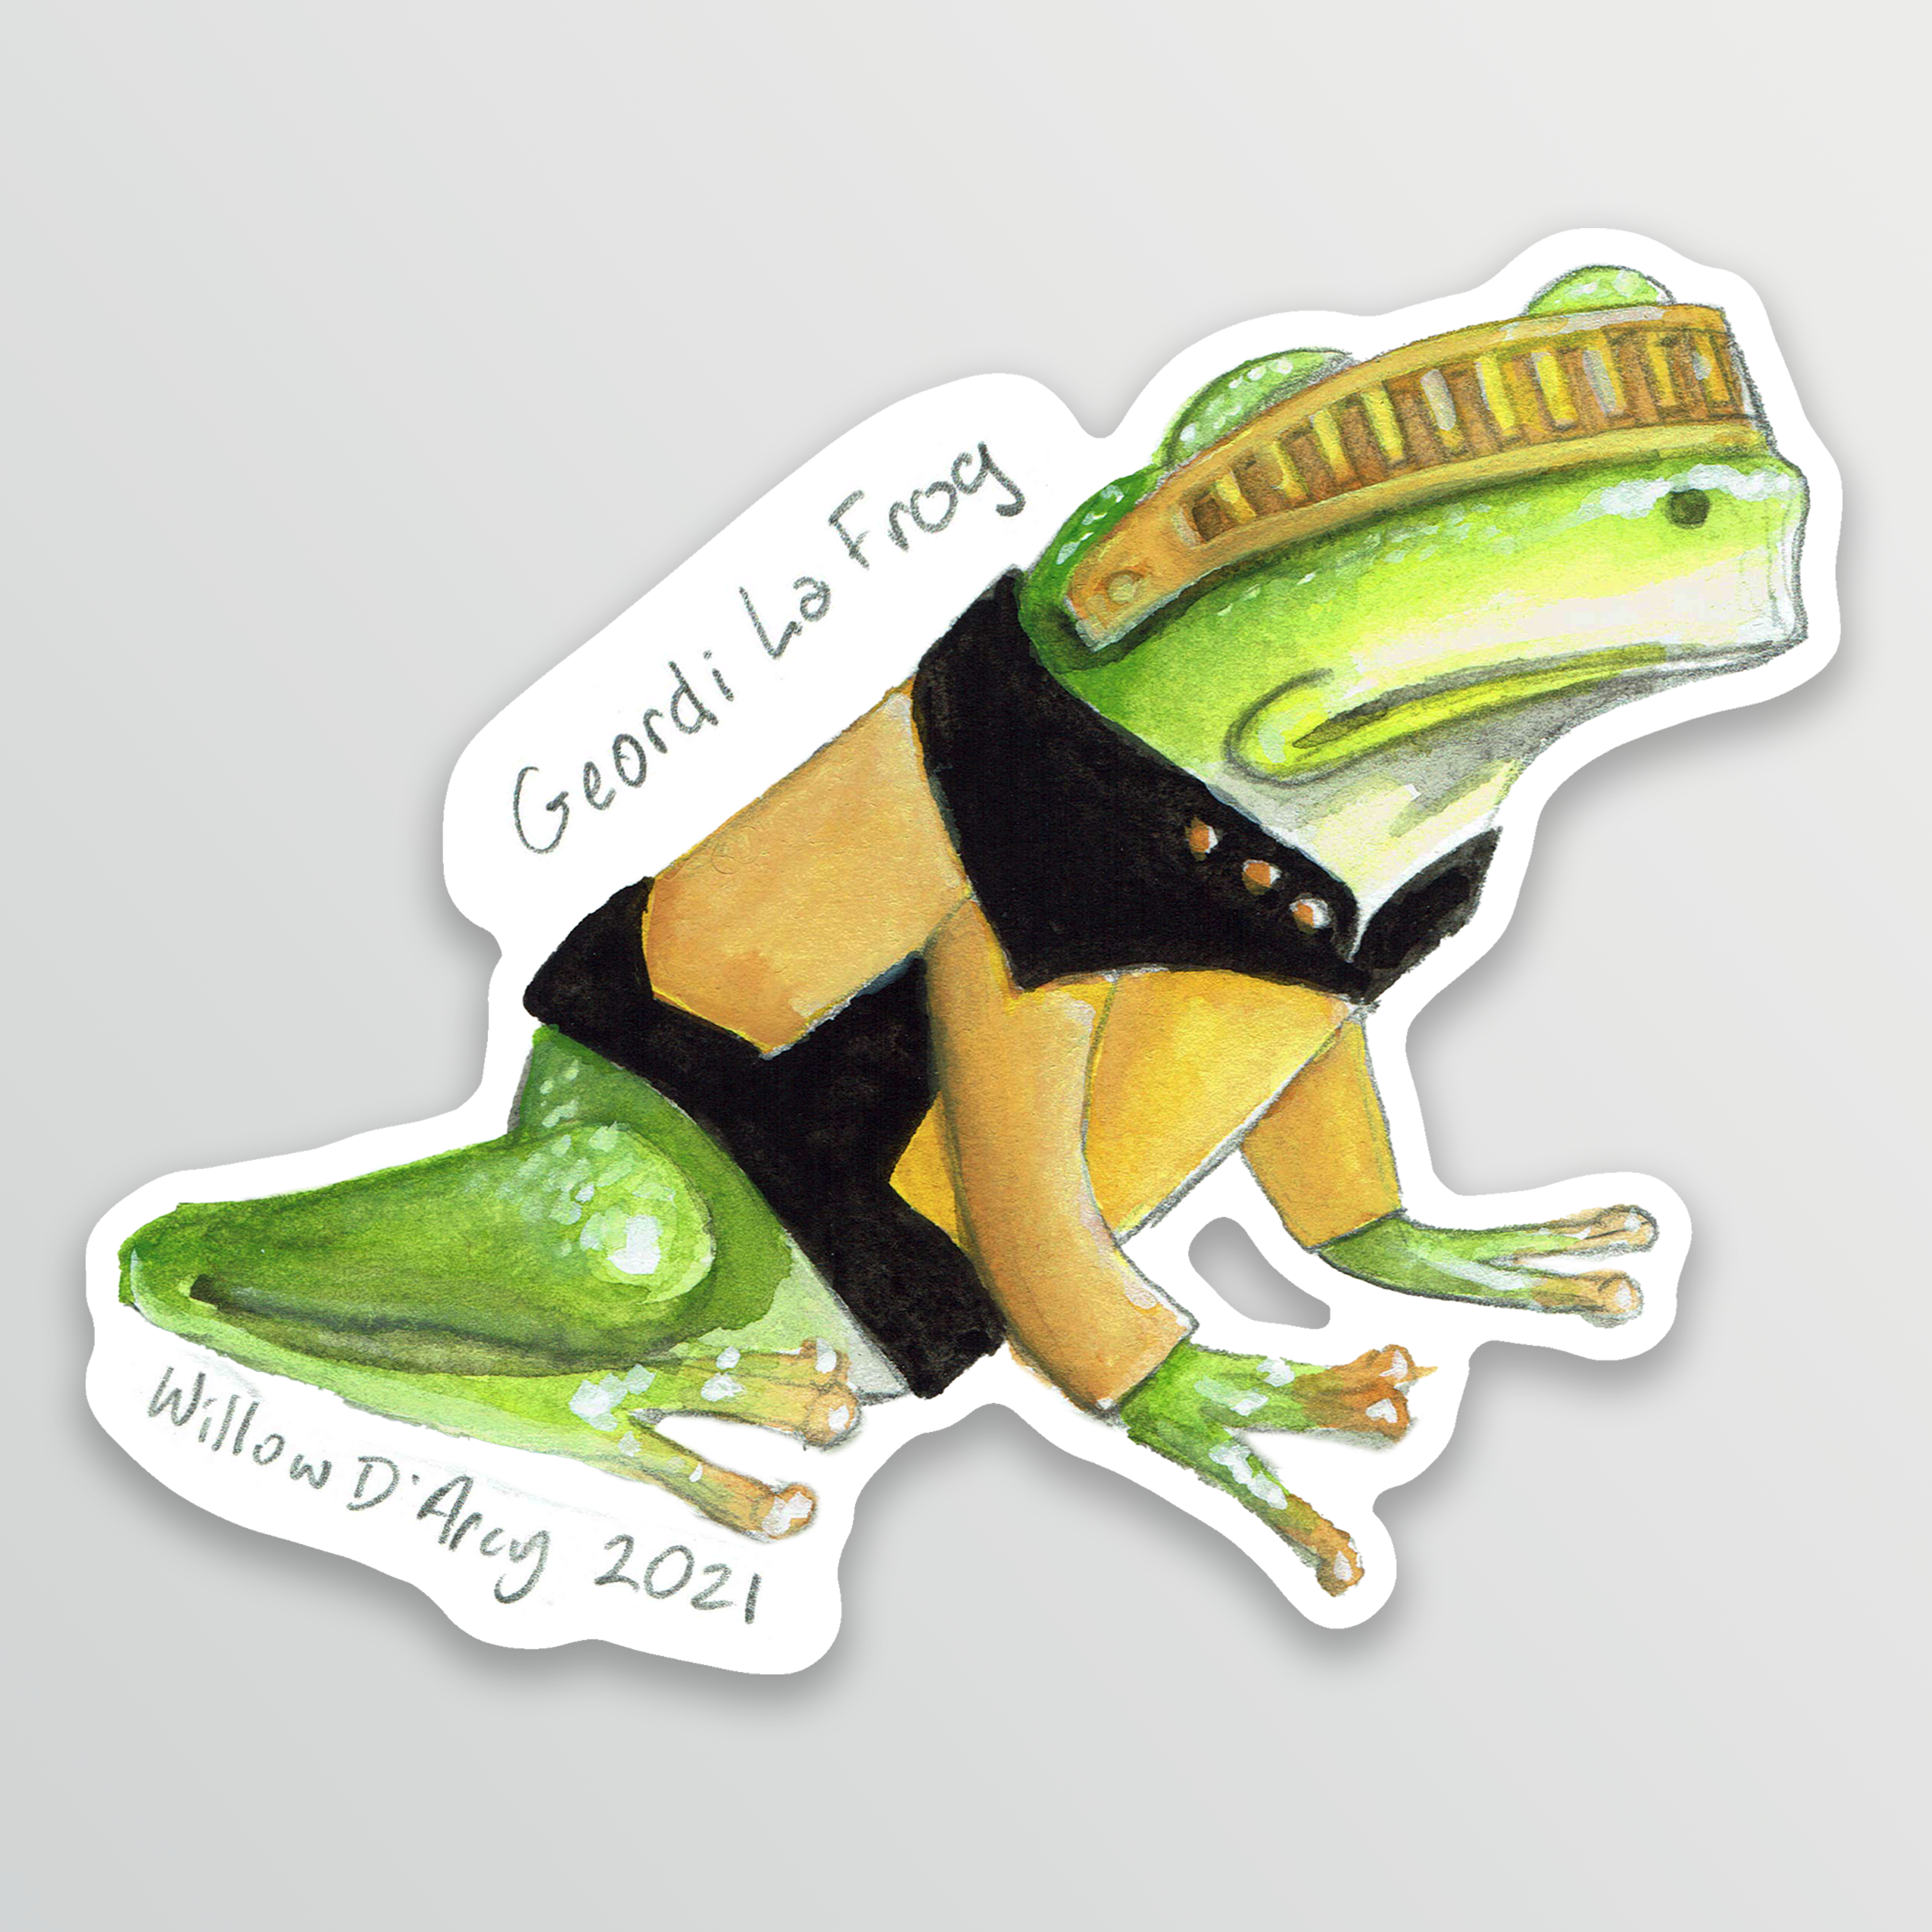 Sticker of an illustration of a frog wearing a science fiction character costume.